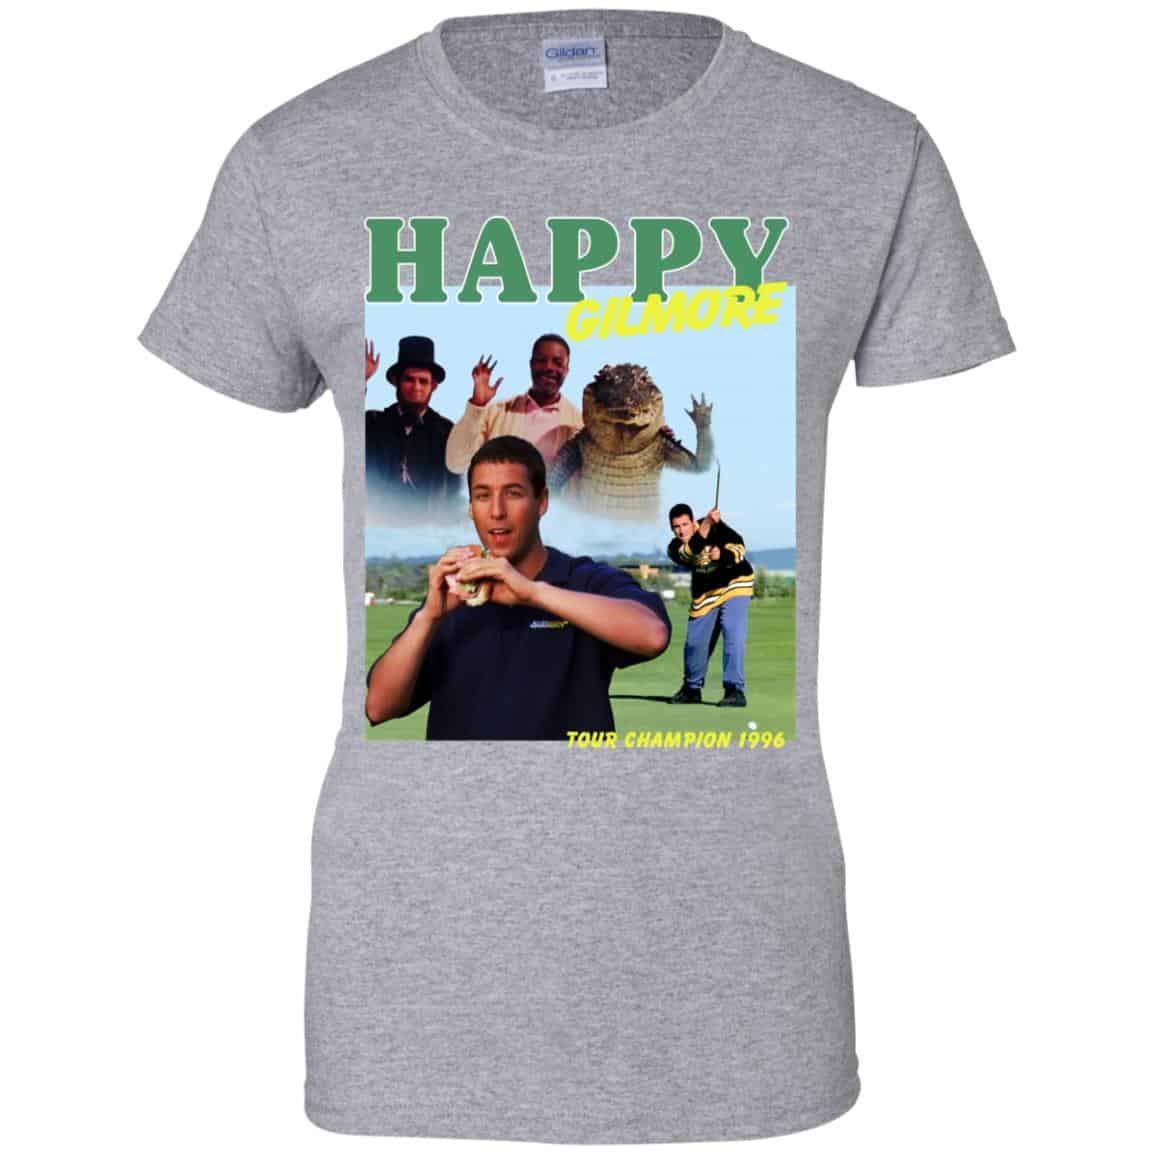 Happy Gilmore T-Shirts for Sale